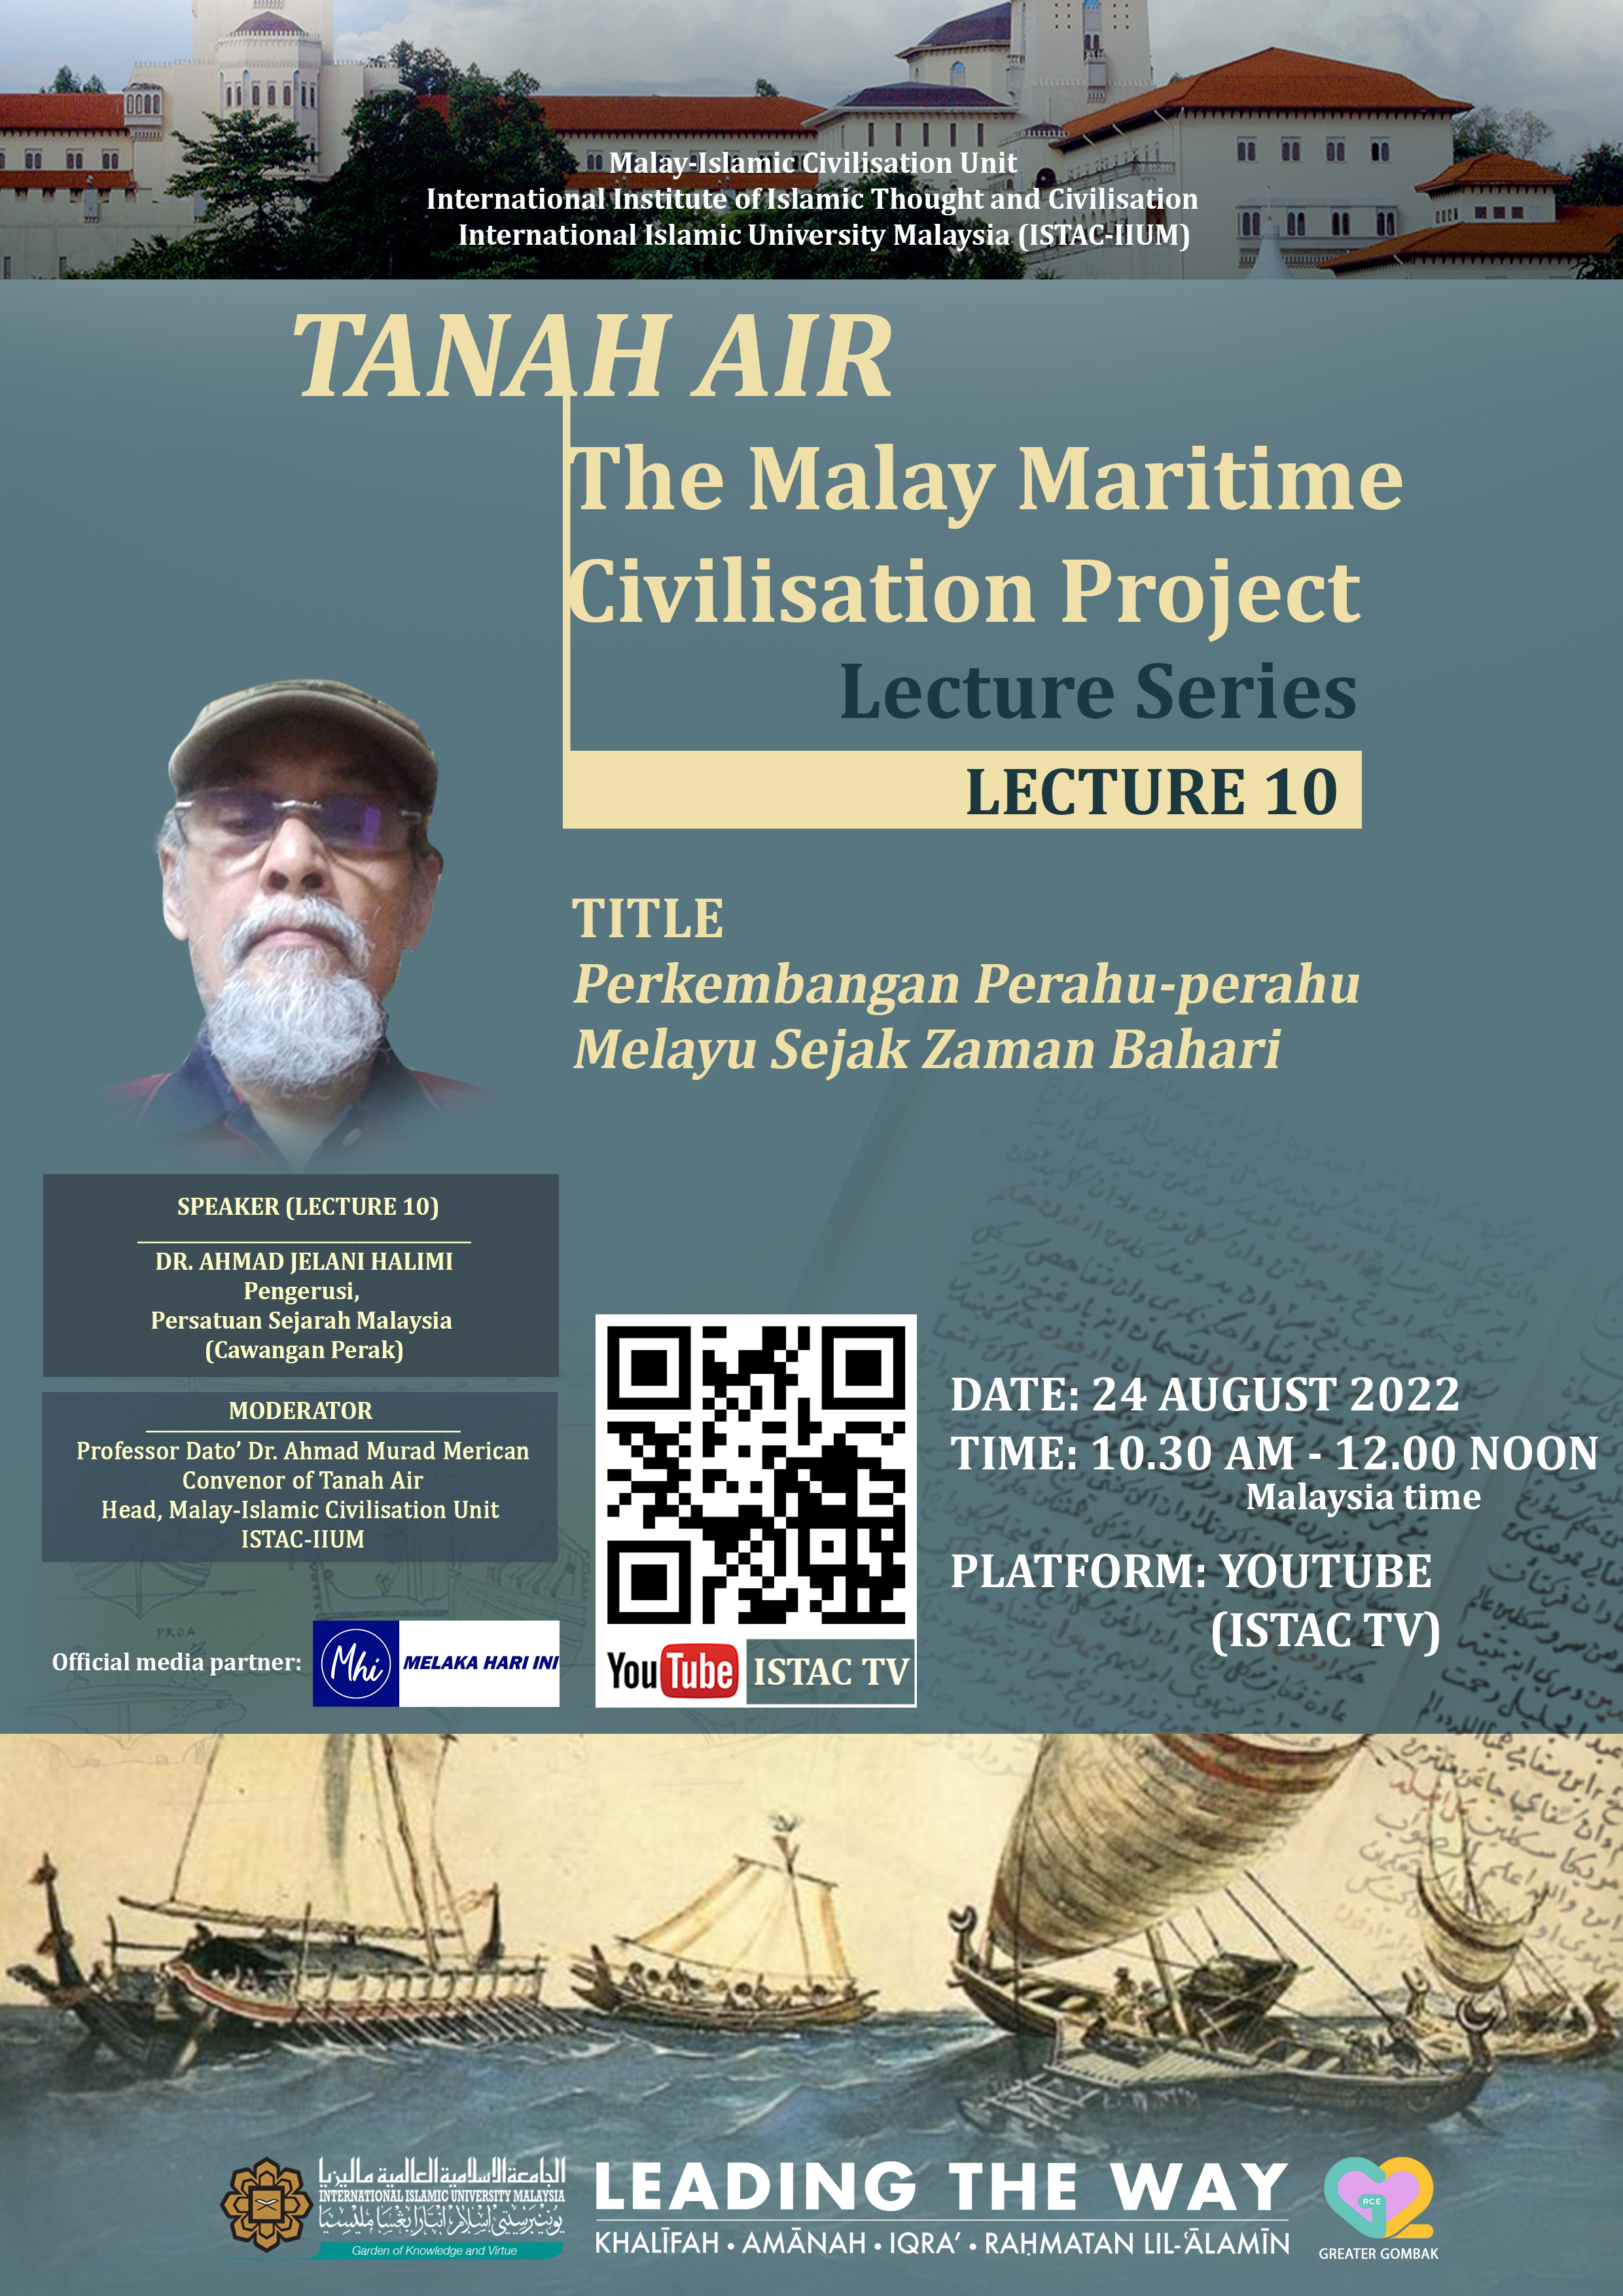 THE TENTH LECTURE OF TANAH AIR: MALAY MARITIME CIVILISATION PROJECT